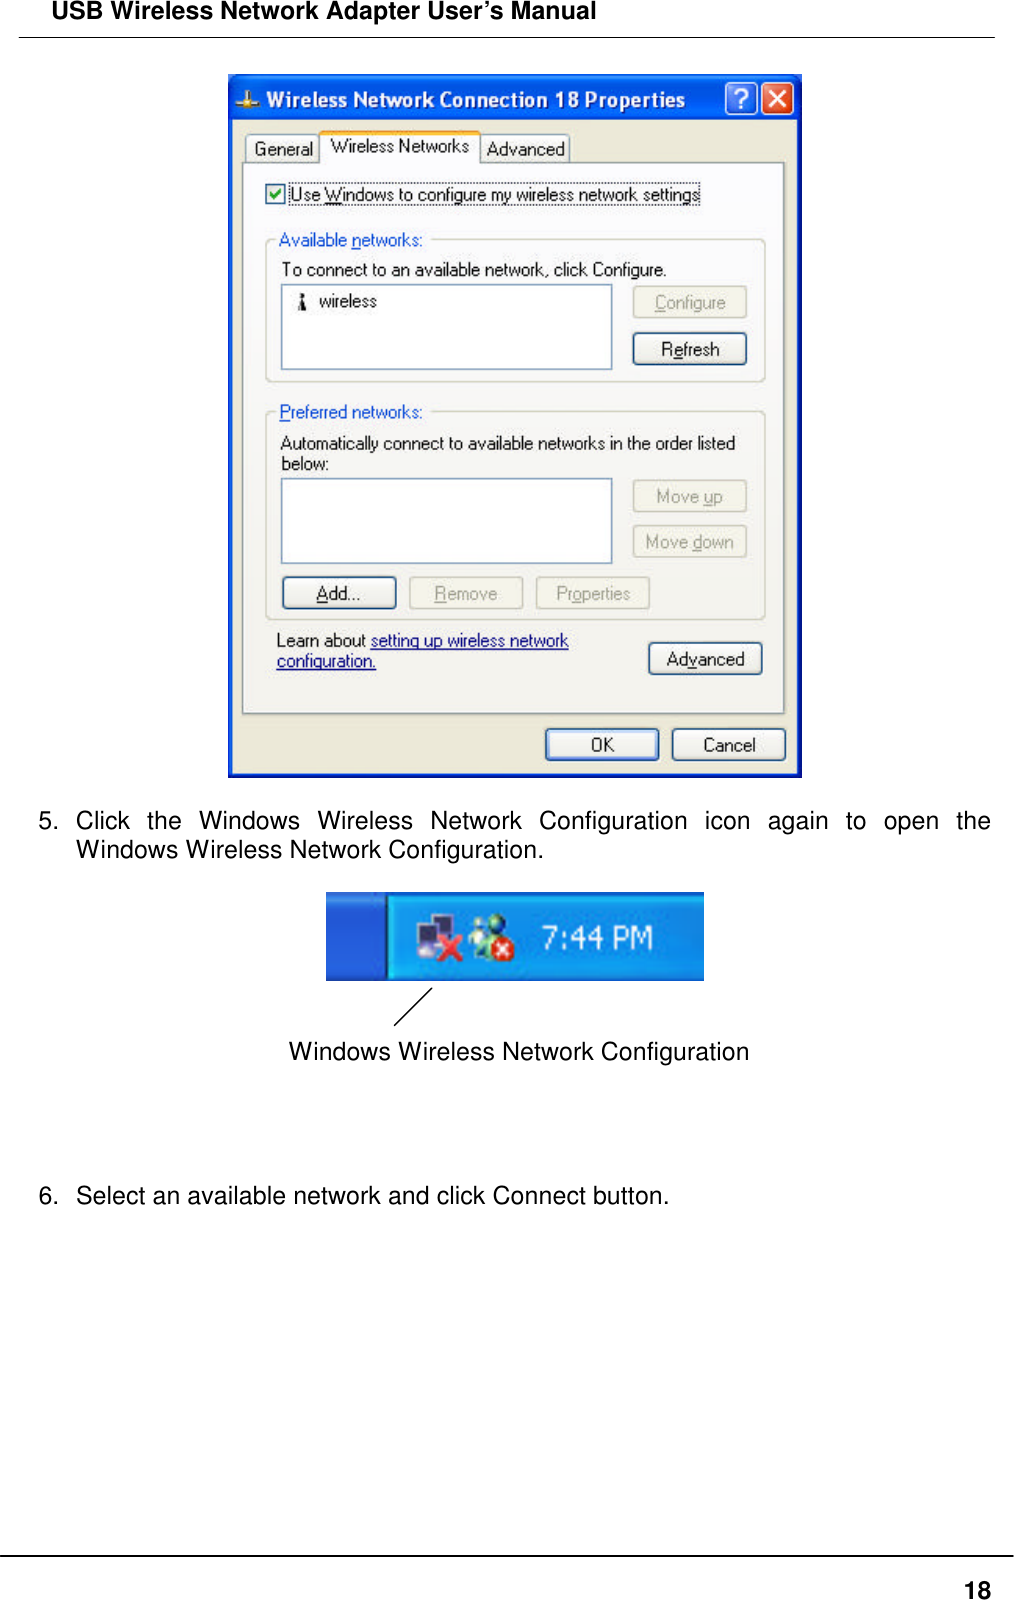  USB Wireless Network Adapter User’s Manual  18  5. Click the Windows Wireless Network Configuration icon again to open the Windows Wireless Network Configuration.     Windows Wireless Network Configuration     6. Select an available network and click Connect button.  